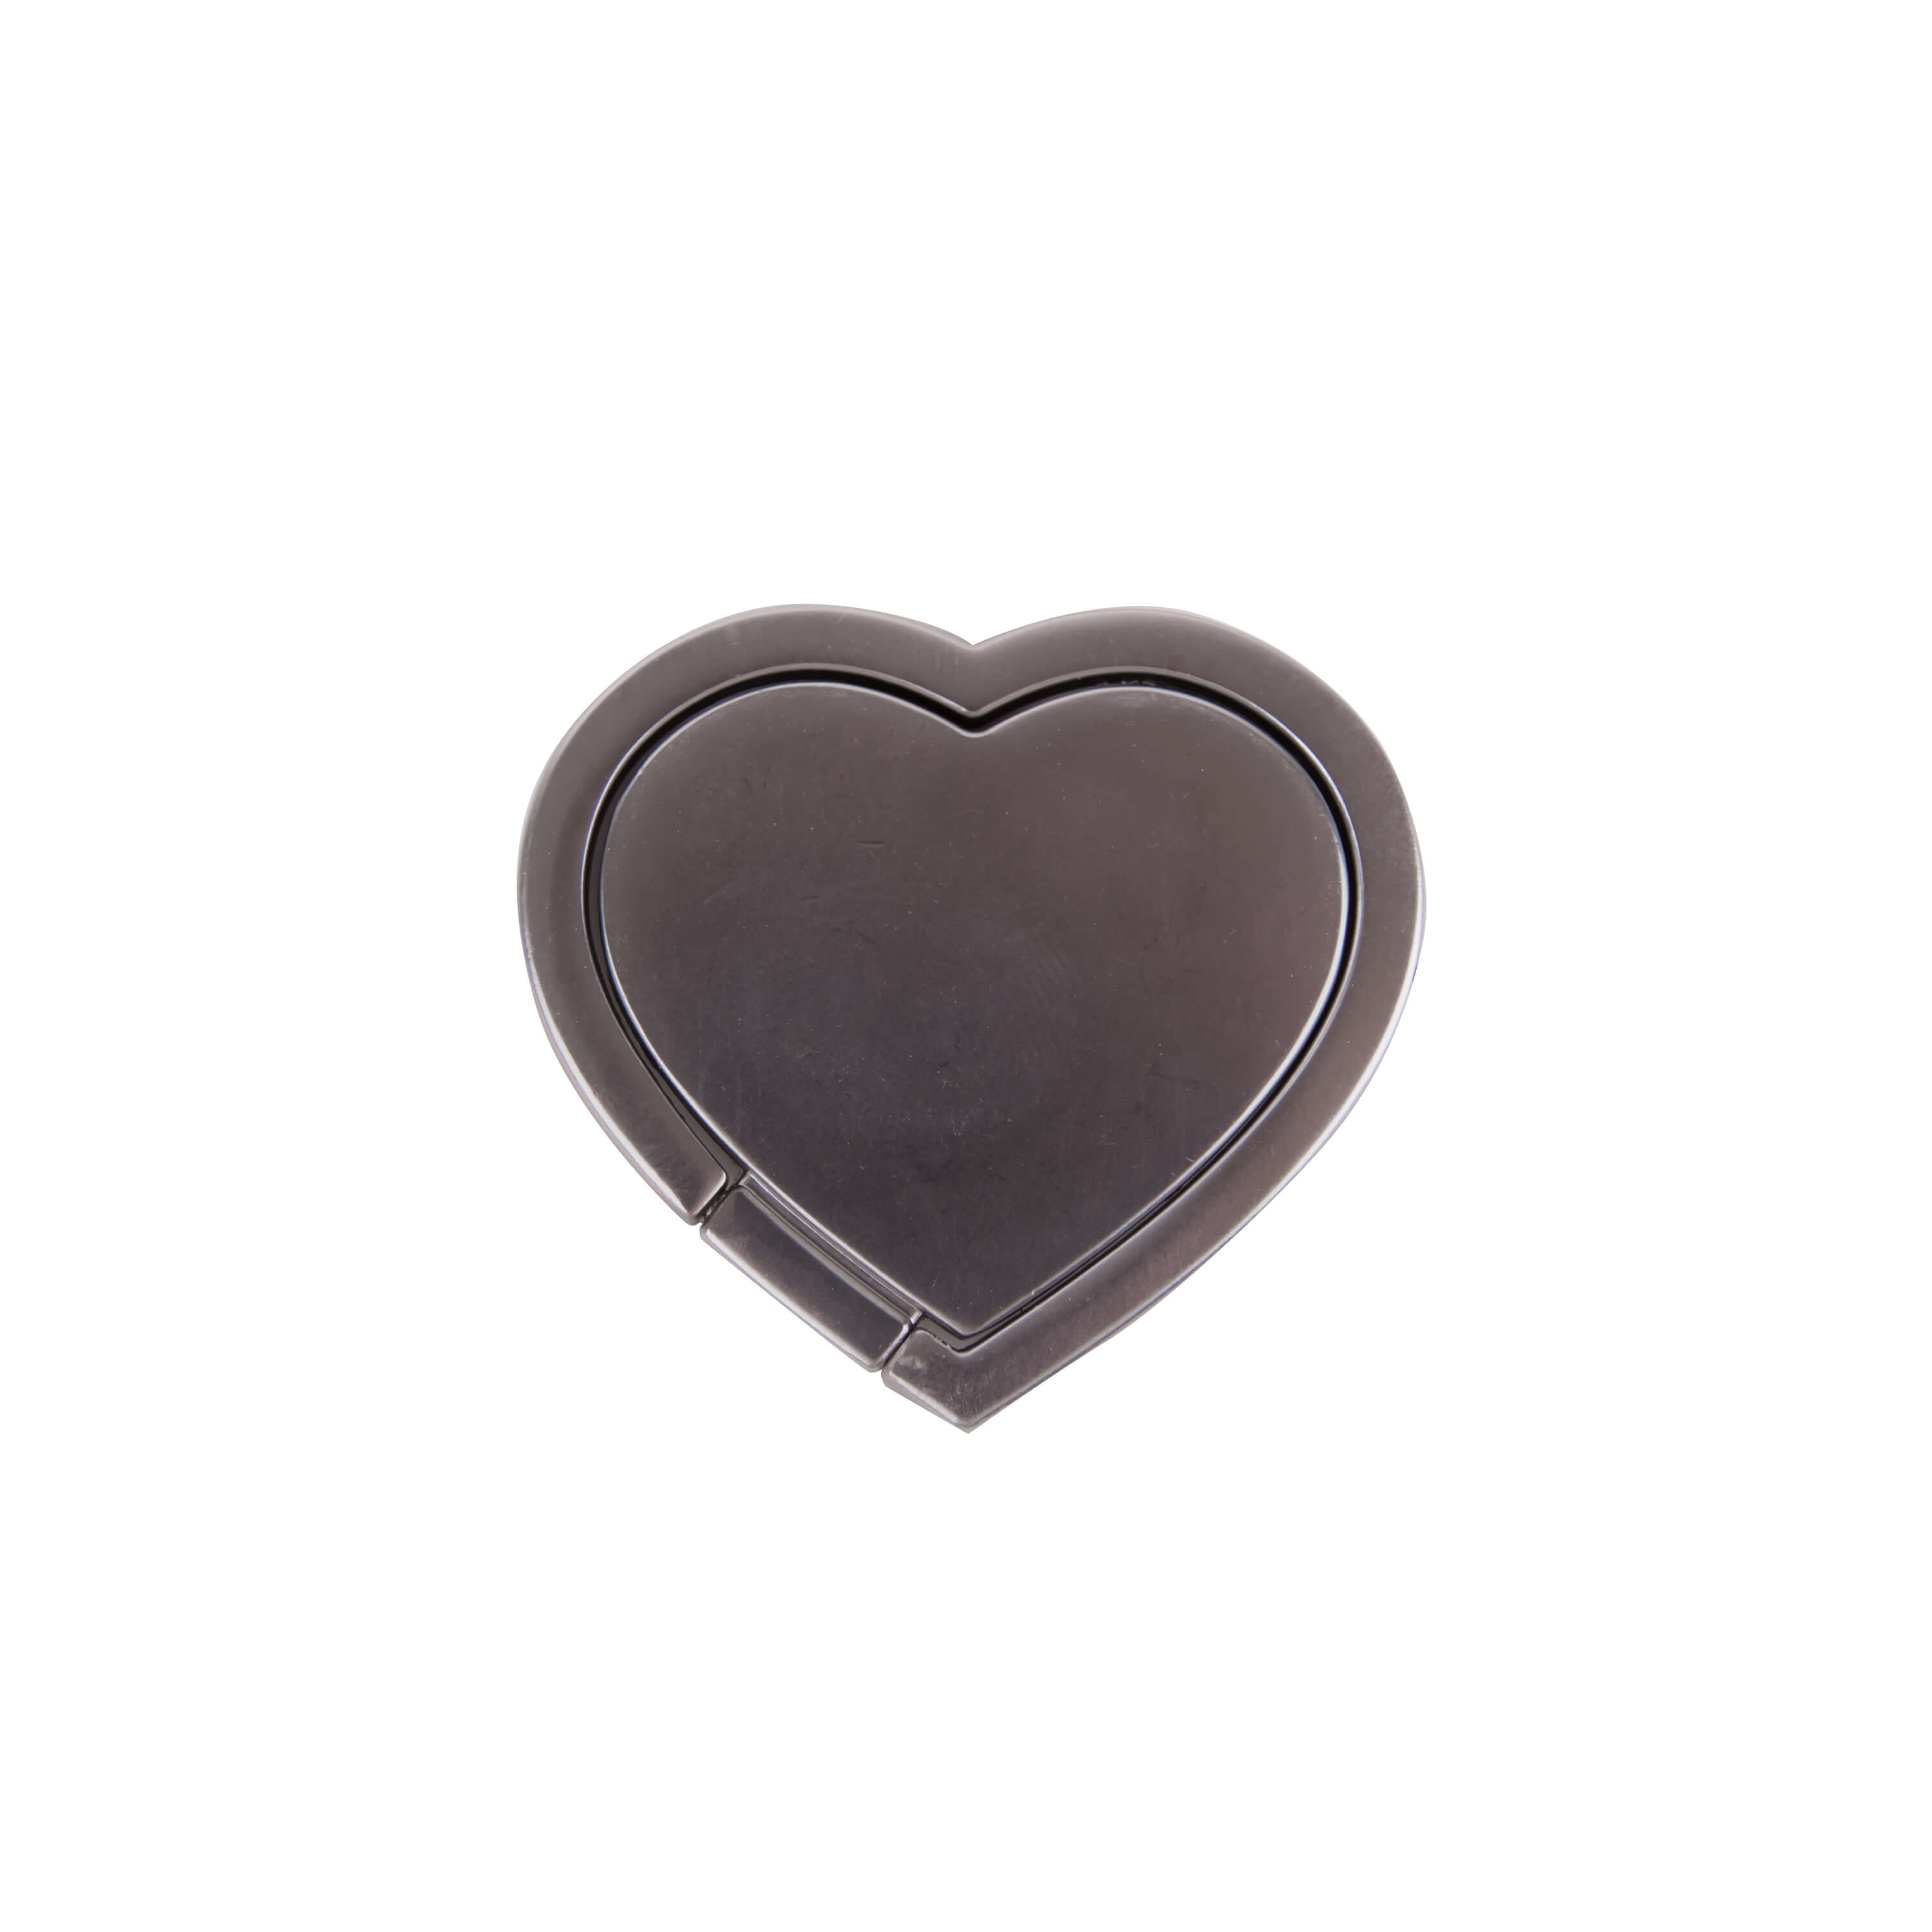 Finger ring heart silver with stand function